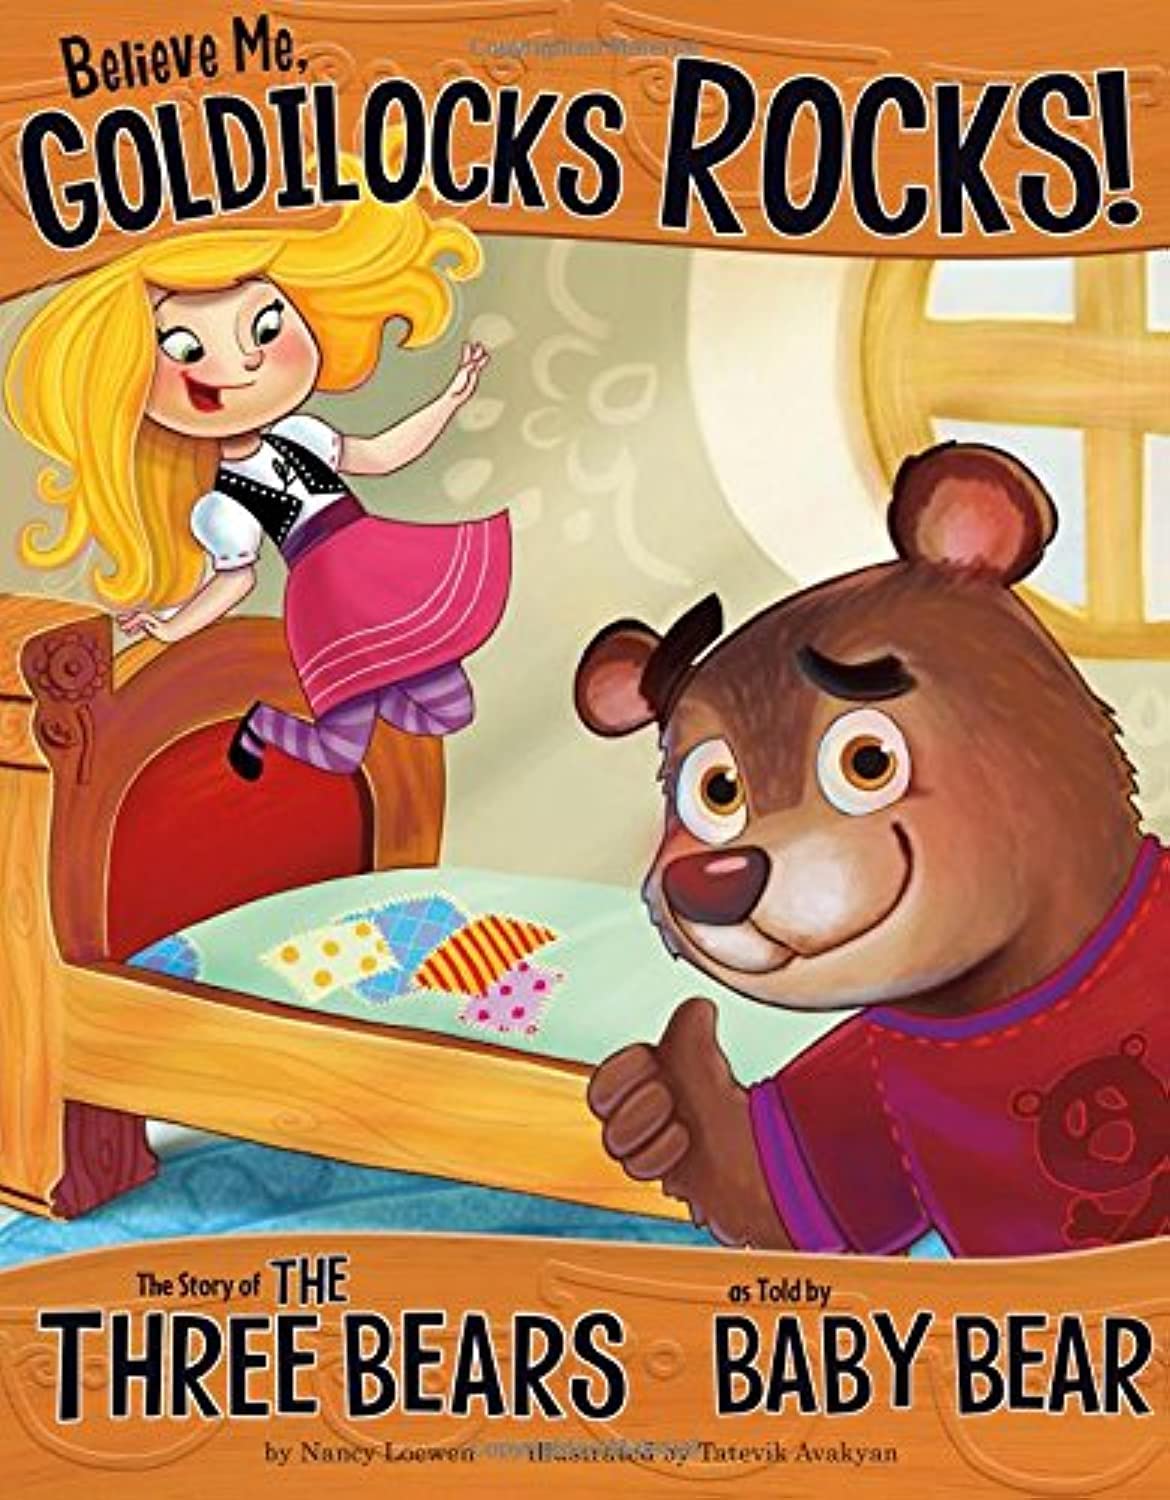 Book Cover Believe Me, Goldilocks Rocks!: The Story of the Three Bears as Told by Baby Bear (The Other Side of the Story)